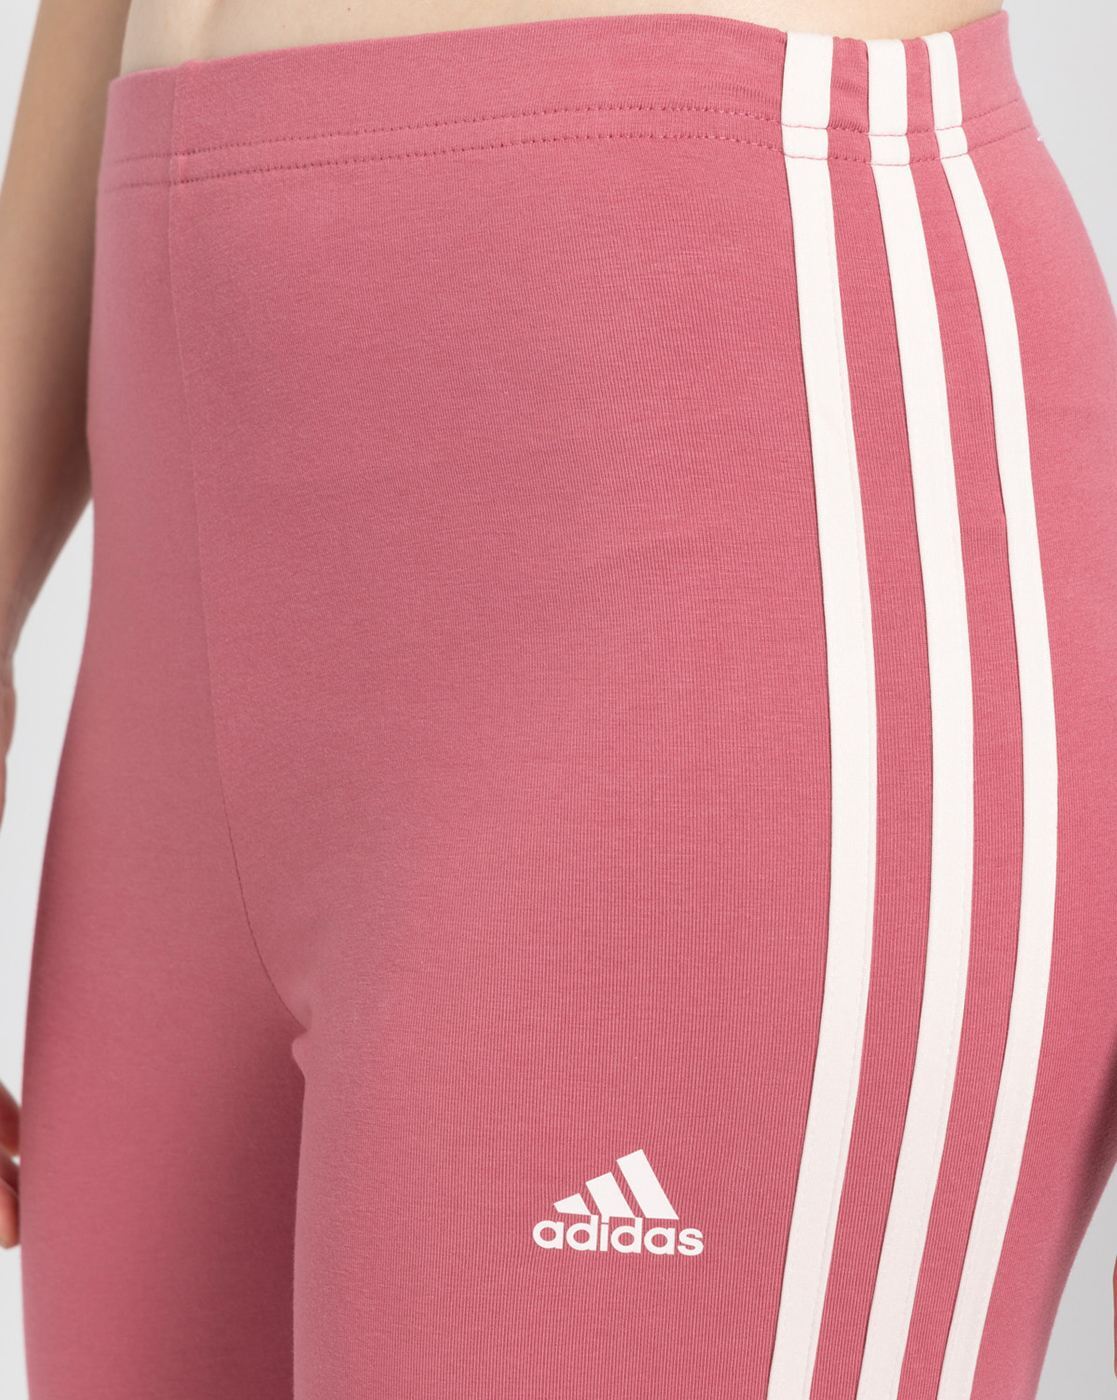 These Pink adidas Originals adicolor Shorts Are a Summer Staple | Trendy  outfits inspiration, Pink shorts outfits, Billabong women